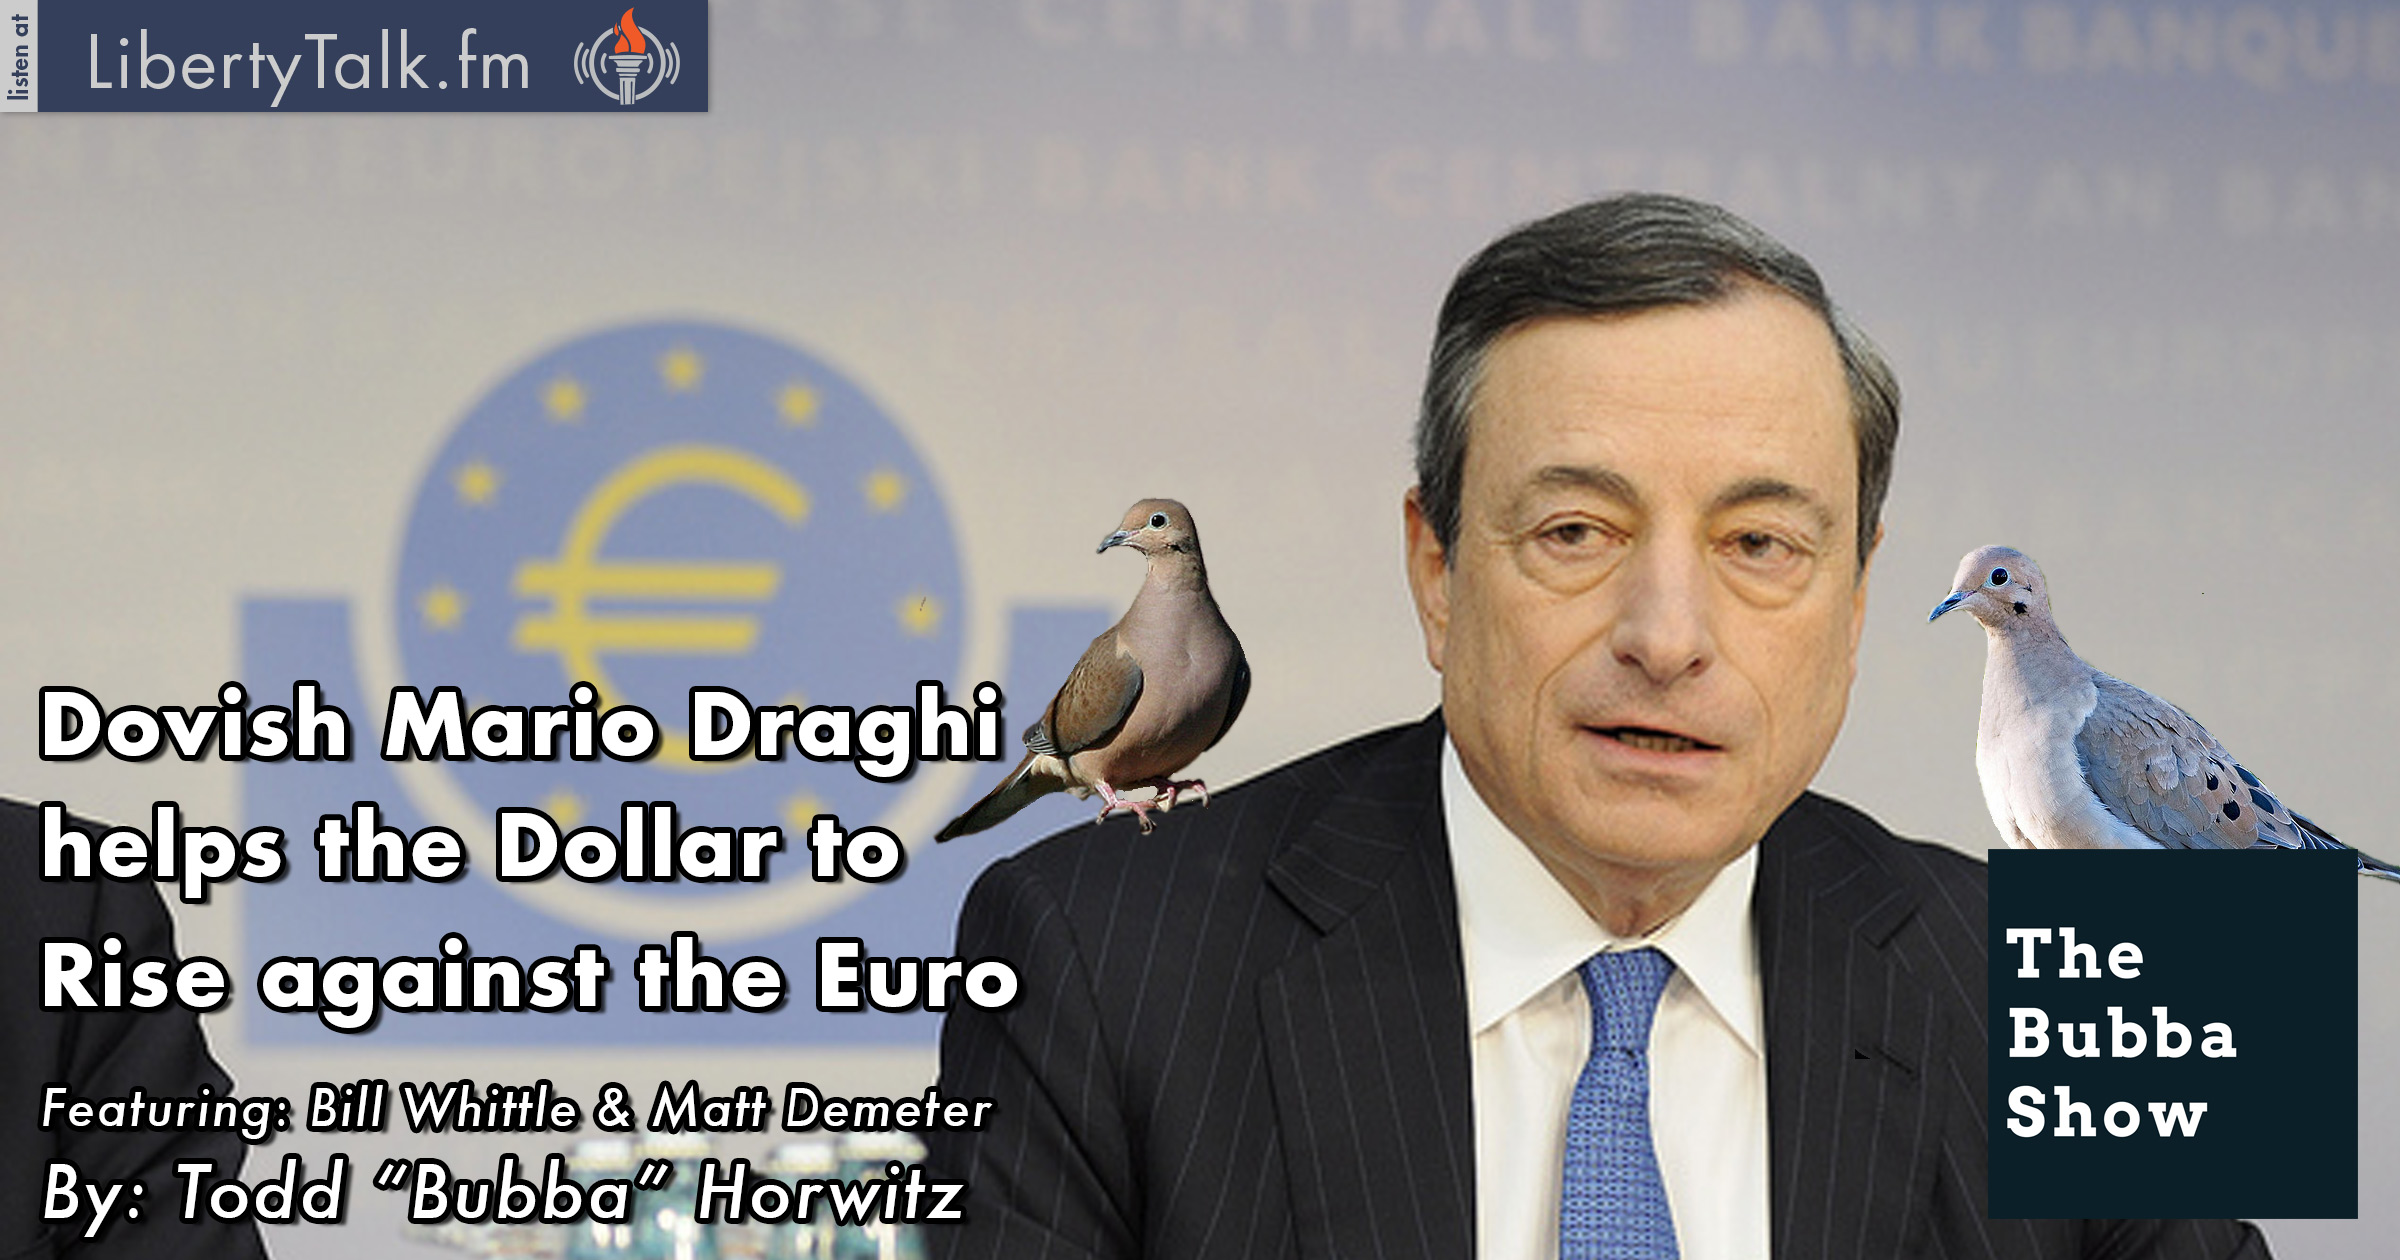 Dovish Mario Draghi helps the Dollar to Rise against the Euro